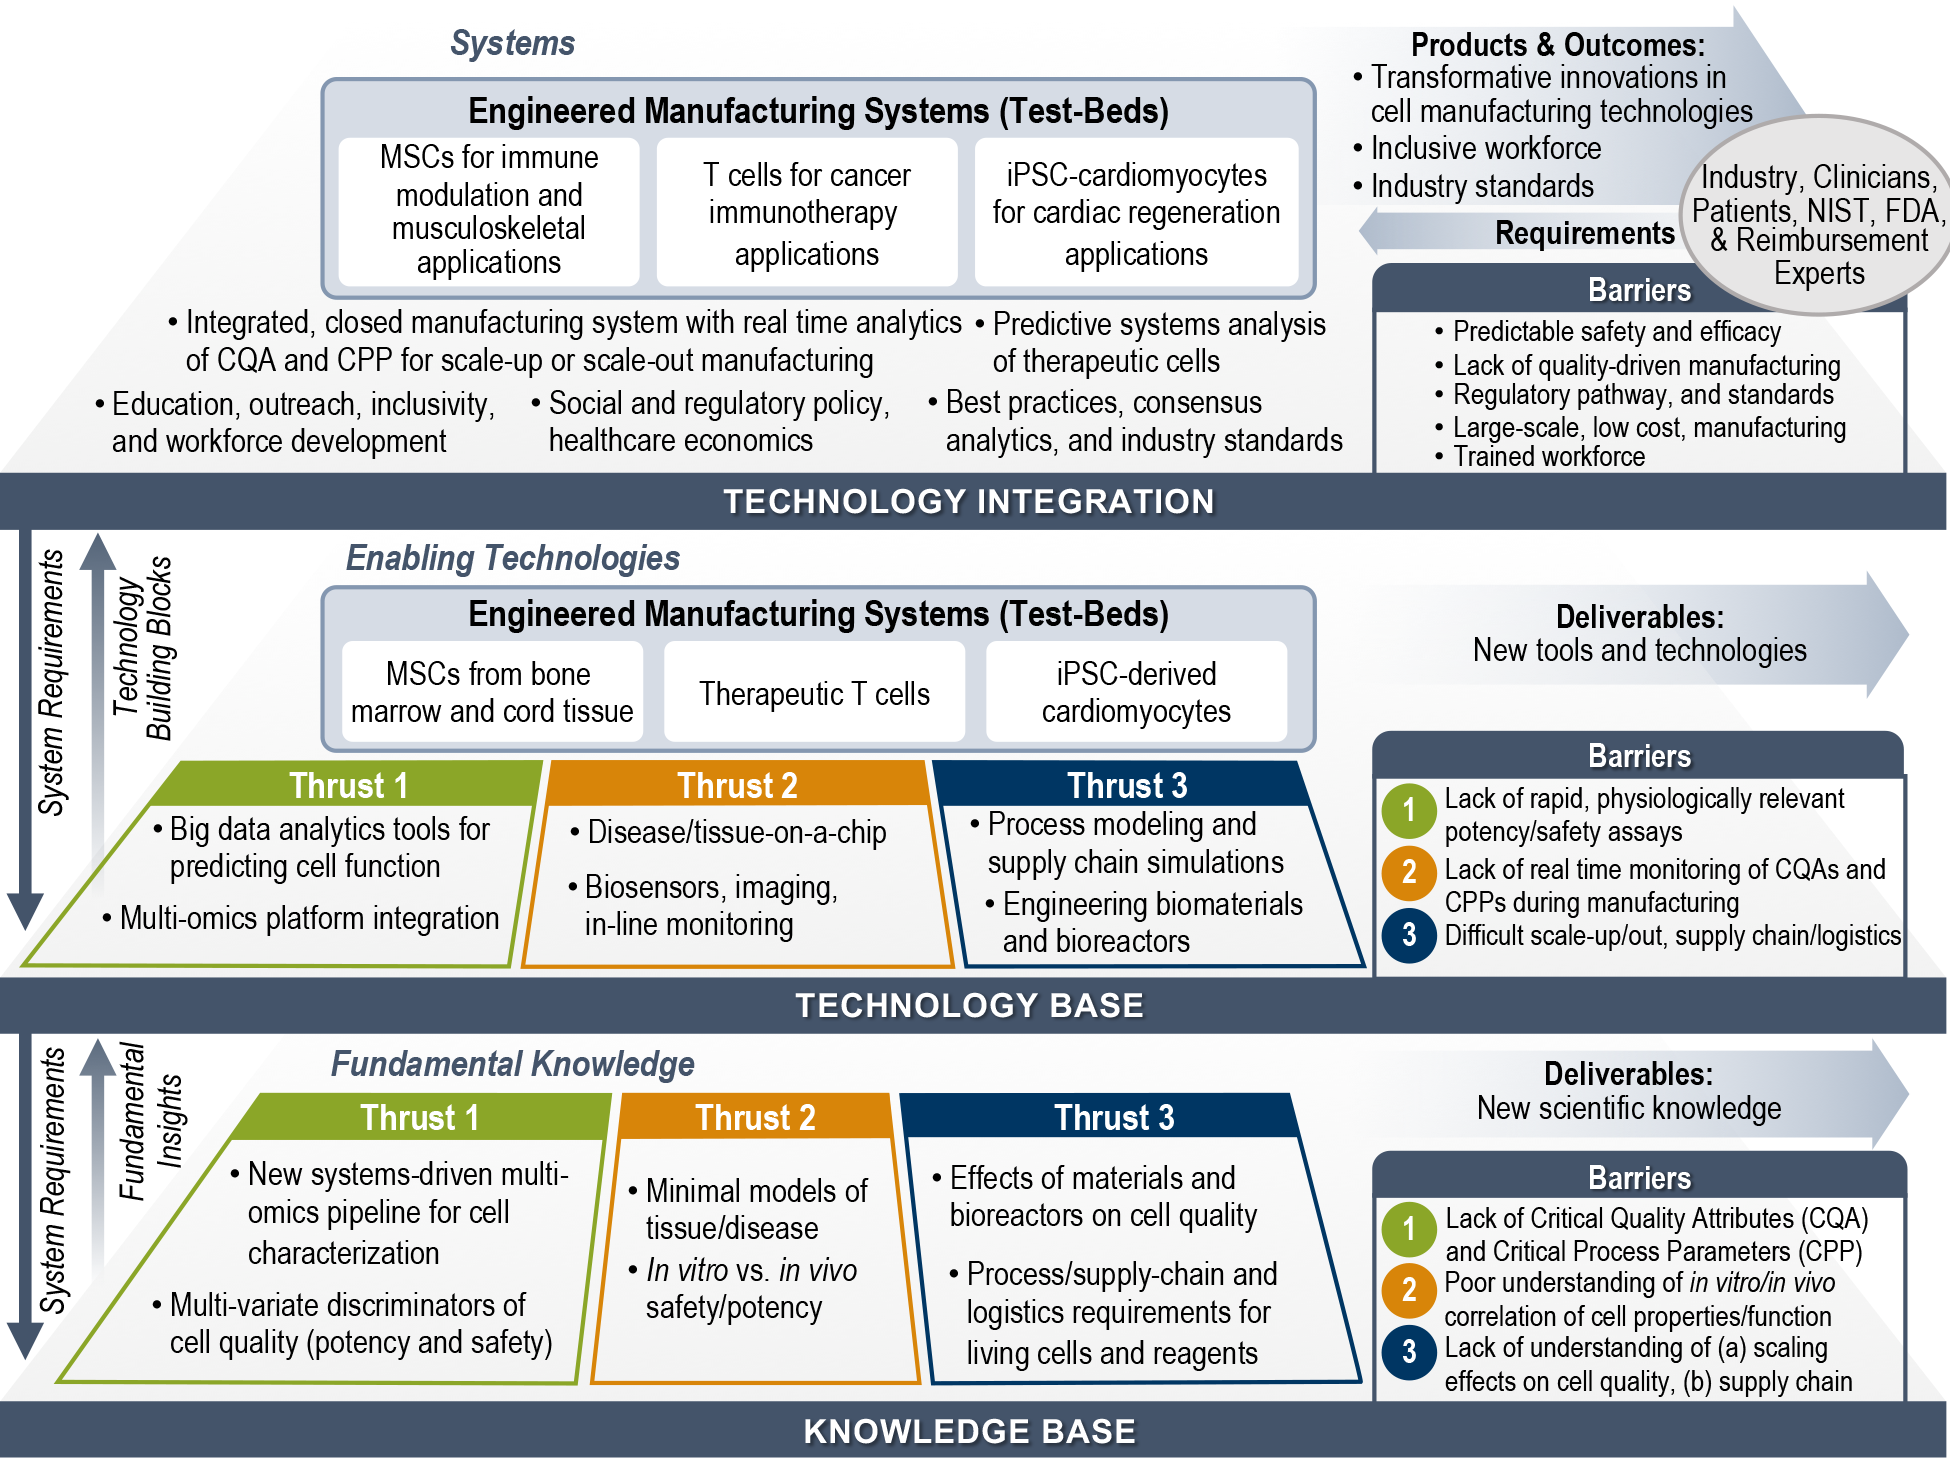 A 3 plane chart describing in detail the testbed manufacturing systems process with thrusts, technology and foundation knowledge